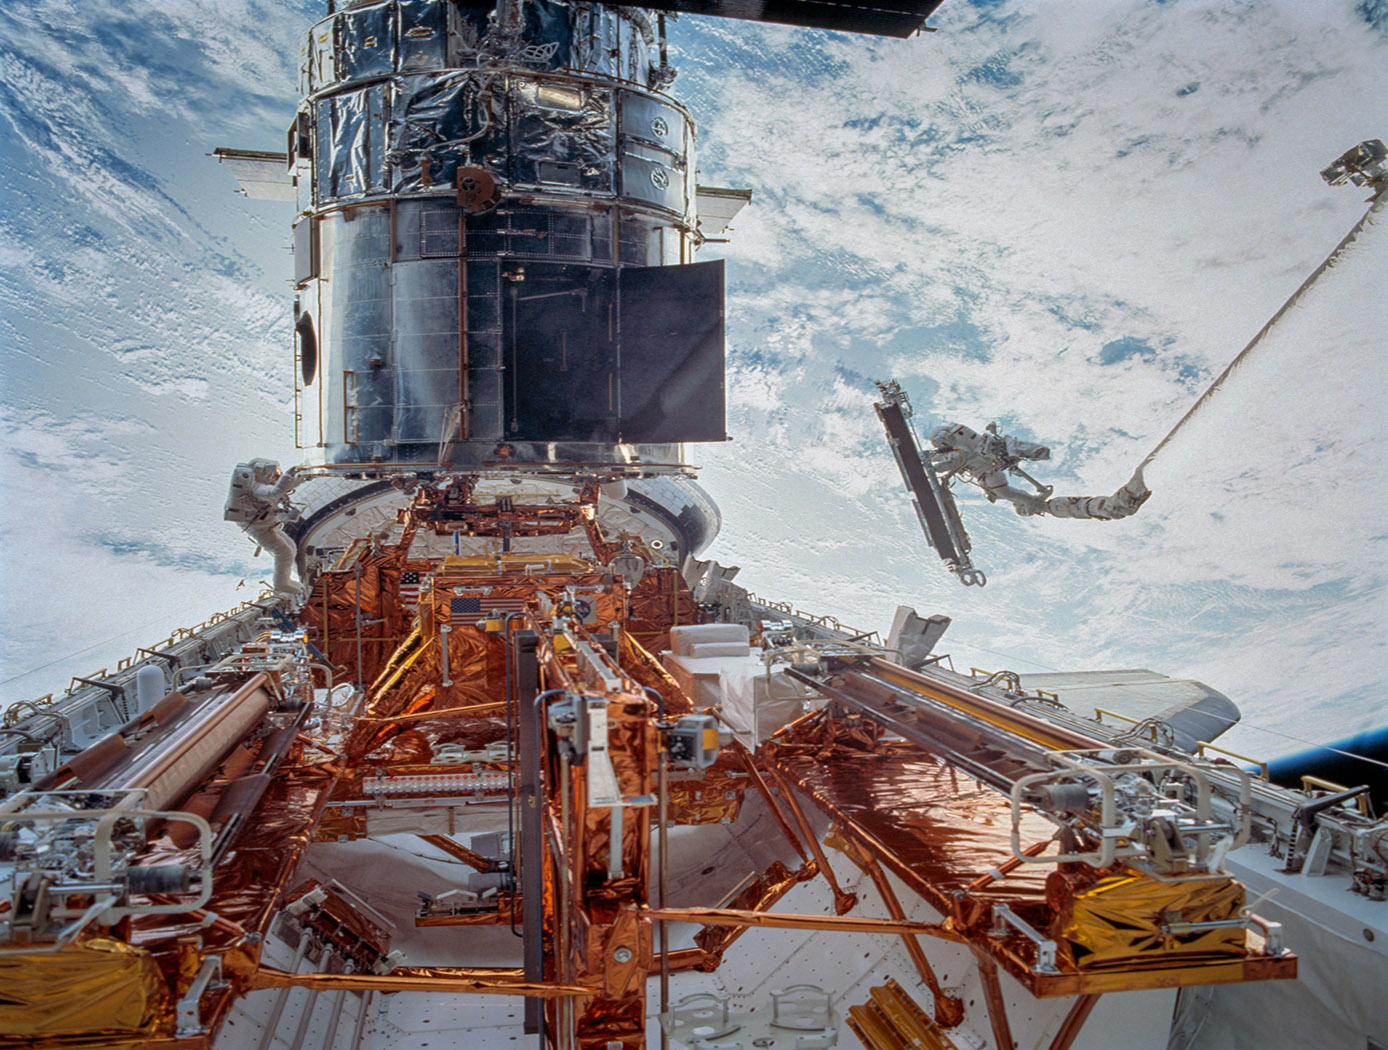 In celebration of the 25th anniversary of NASA's first space servicing mission to the Hubble Space Telescope, we are sharing this gallery of images from all five of the Hubble servicing missions. Astronauts serviced Hubble for the first time in December 1993. Including that trip, there have been five astronaut servicing missions to Hubble between 1993 and 2009. How did astronauts repair and service the Hubble Space Telescope more than 300 miles above the surface of the Earth? Watch Hubble astronauts as they discuss servicing from the innovative Robotics Operations Center: bit.ly/2EiiNTP STS109-713-003 (8 March 2002) --- Astronaut John M. Grunsfeld, STS-109 payload commander, anchored on the end of the Space Shuttle Columbias Remote Manipulator System (RMS) robotic arm, moves toward the giant Hubble Space Telescope (HST) temporarily hosted in the orbiters cargo bay. Astronaut Richard M. Linnehan works in tandem with Grunsfeld during this fifth and final session of extravehicular activity (EVA). Activities for the space walk centered around the Near-Infrared Camera and Multi-Object Spectrometer (NICMOS) to install a Cryogenic Cooler and its Cooling System Radiator.